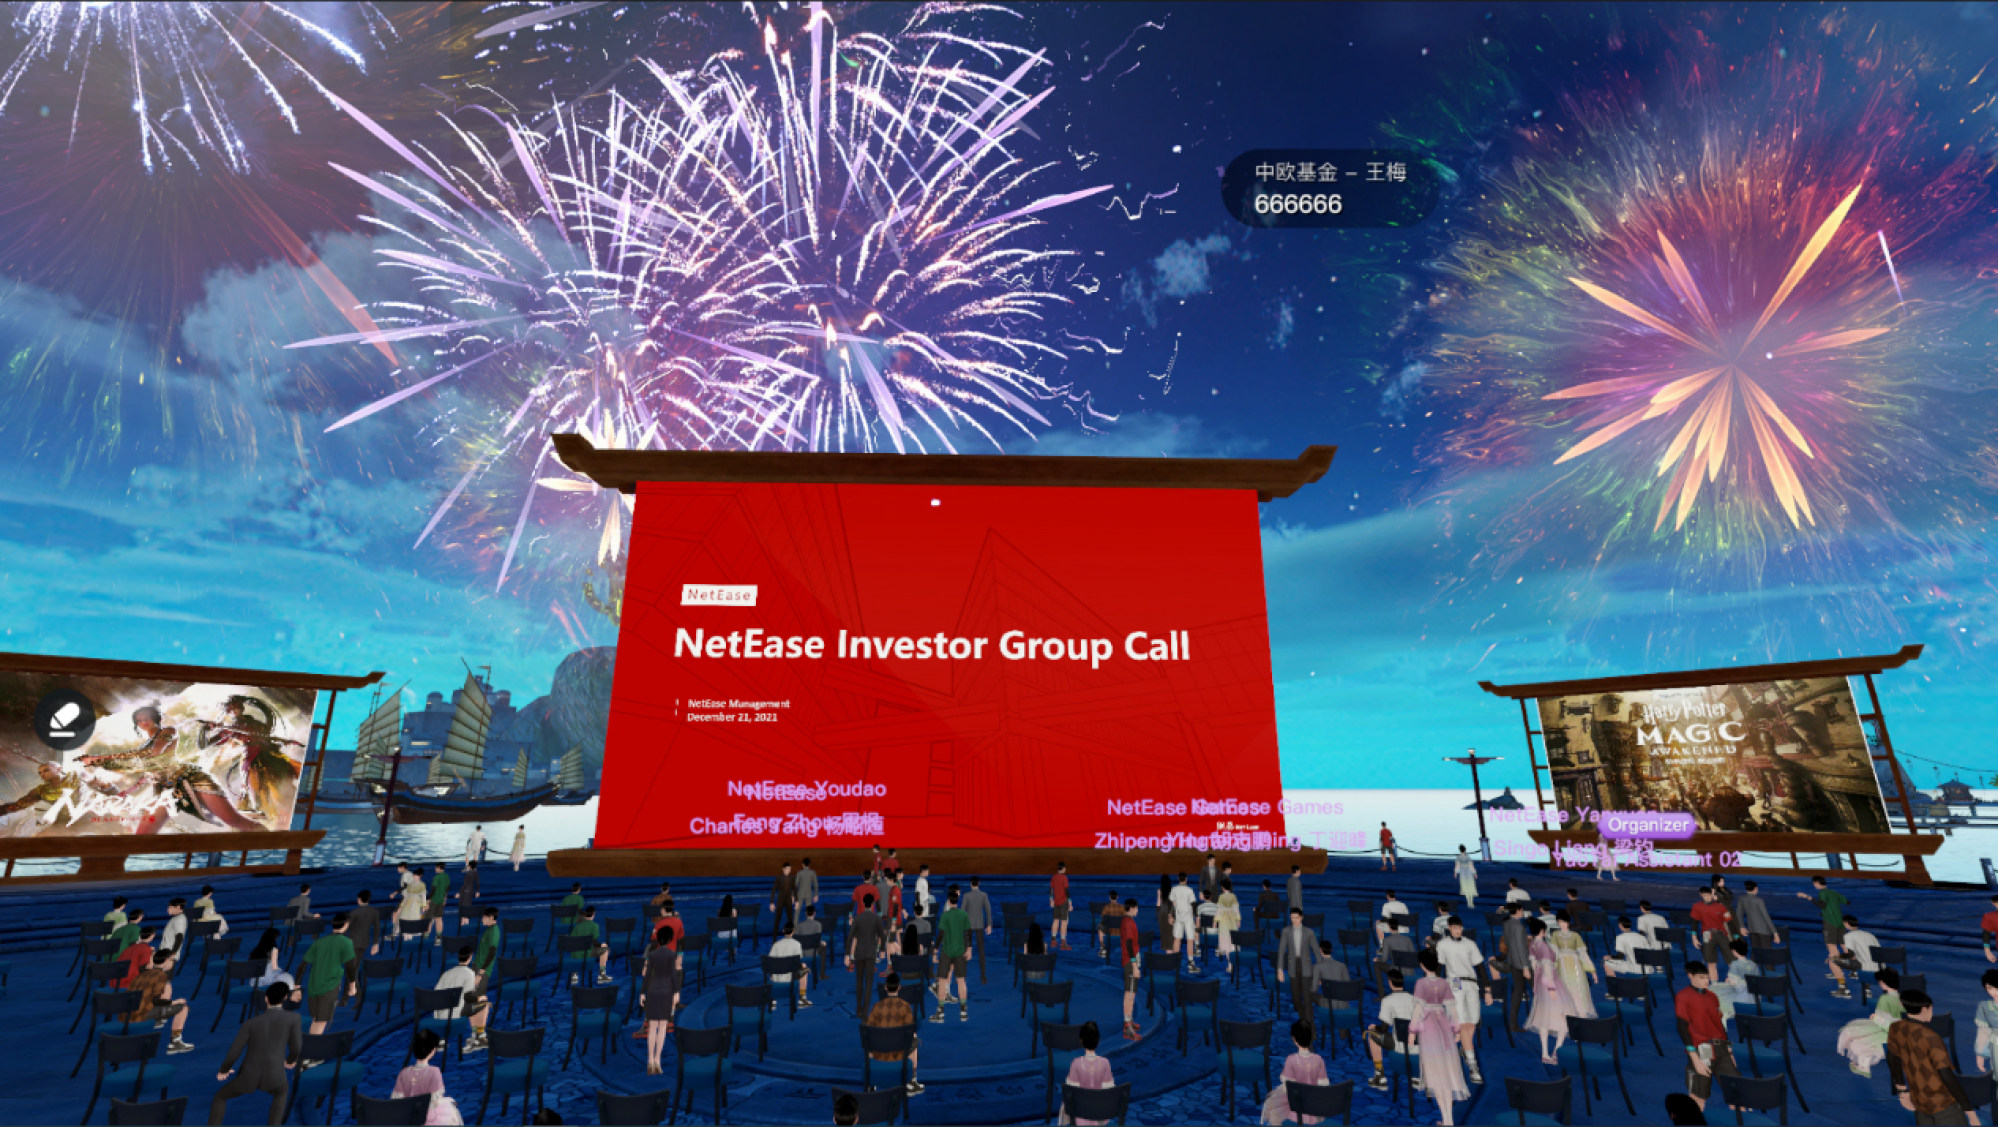 NetEase held its investor meeting on December 21, 2021, on Yaotai’s immersive virtual conference platform. Photo: Handout